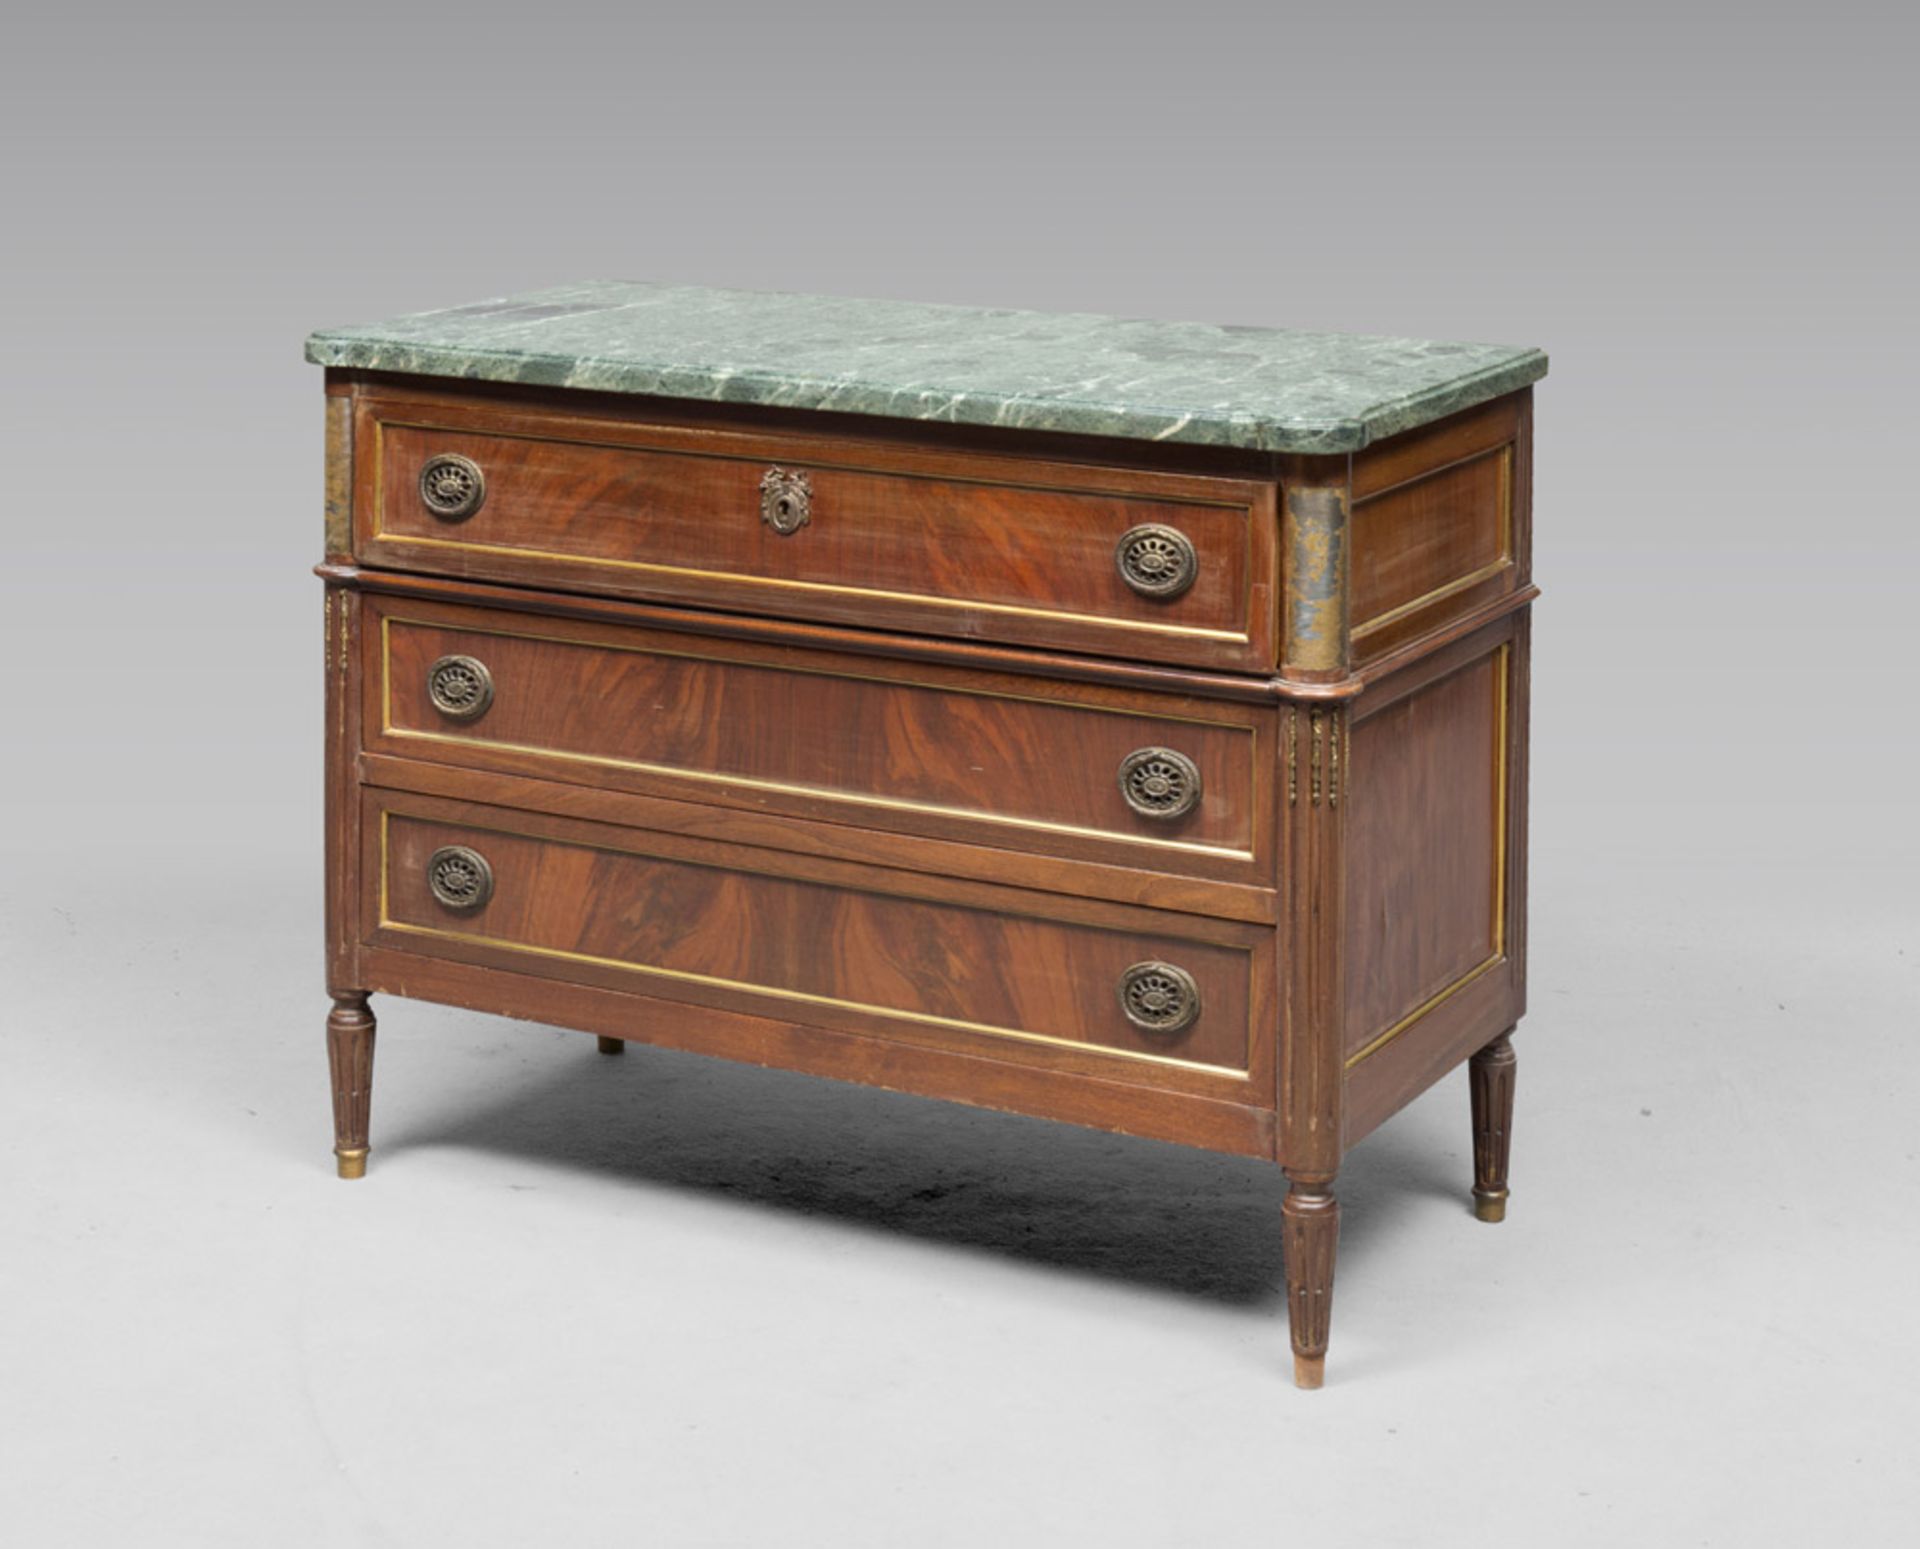 A SMALL MAHOGANY COMMODE, FRANCE LATE 18TH CENTURY With a green marble top and three drawer